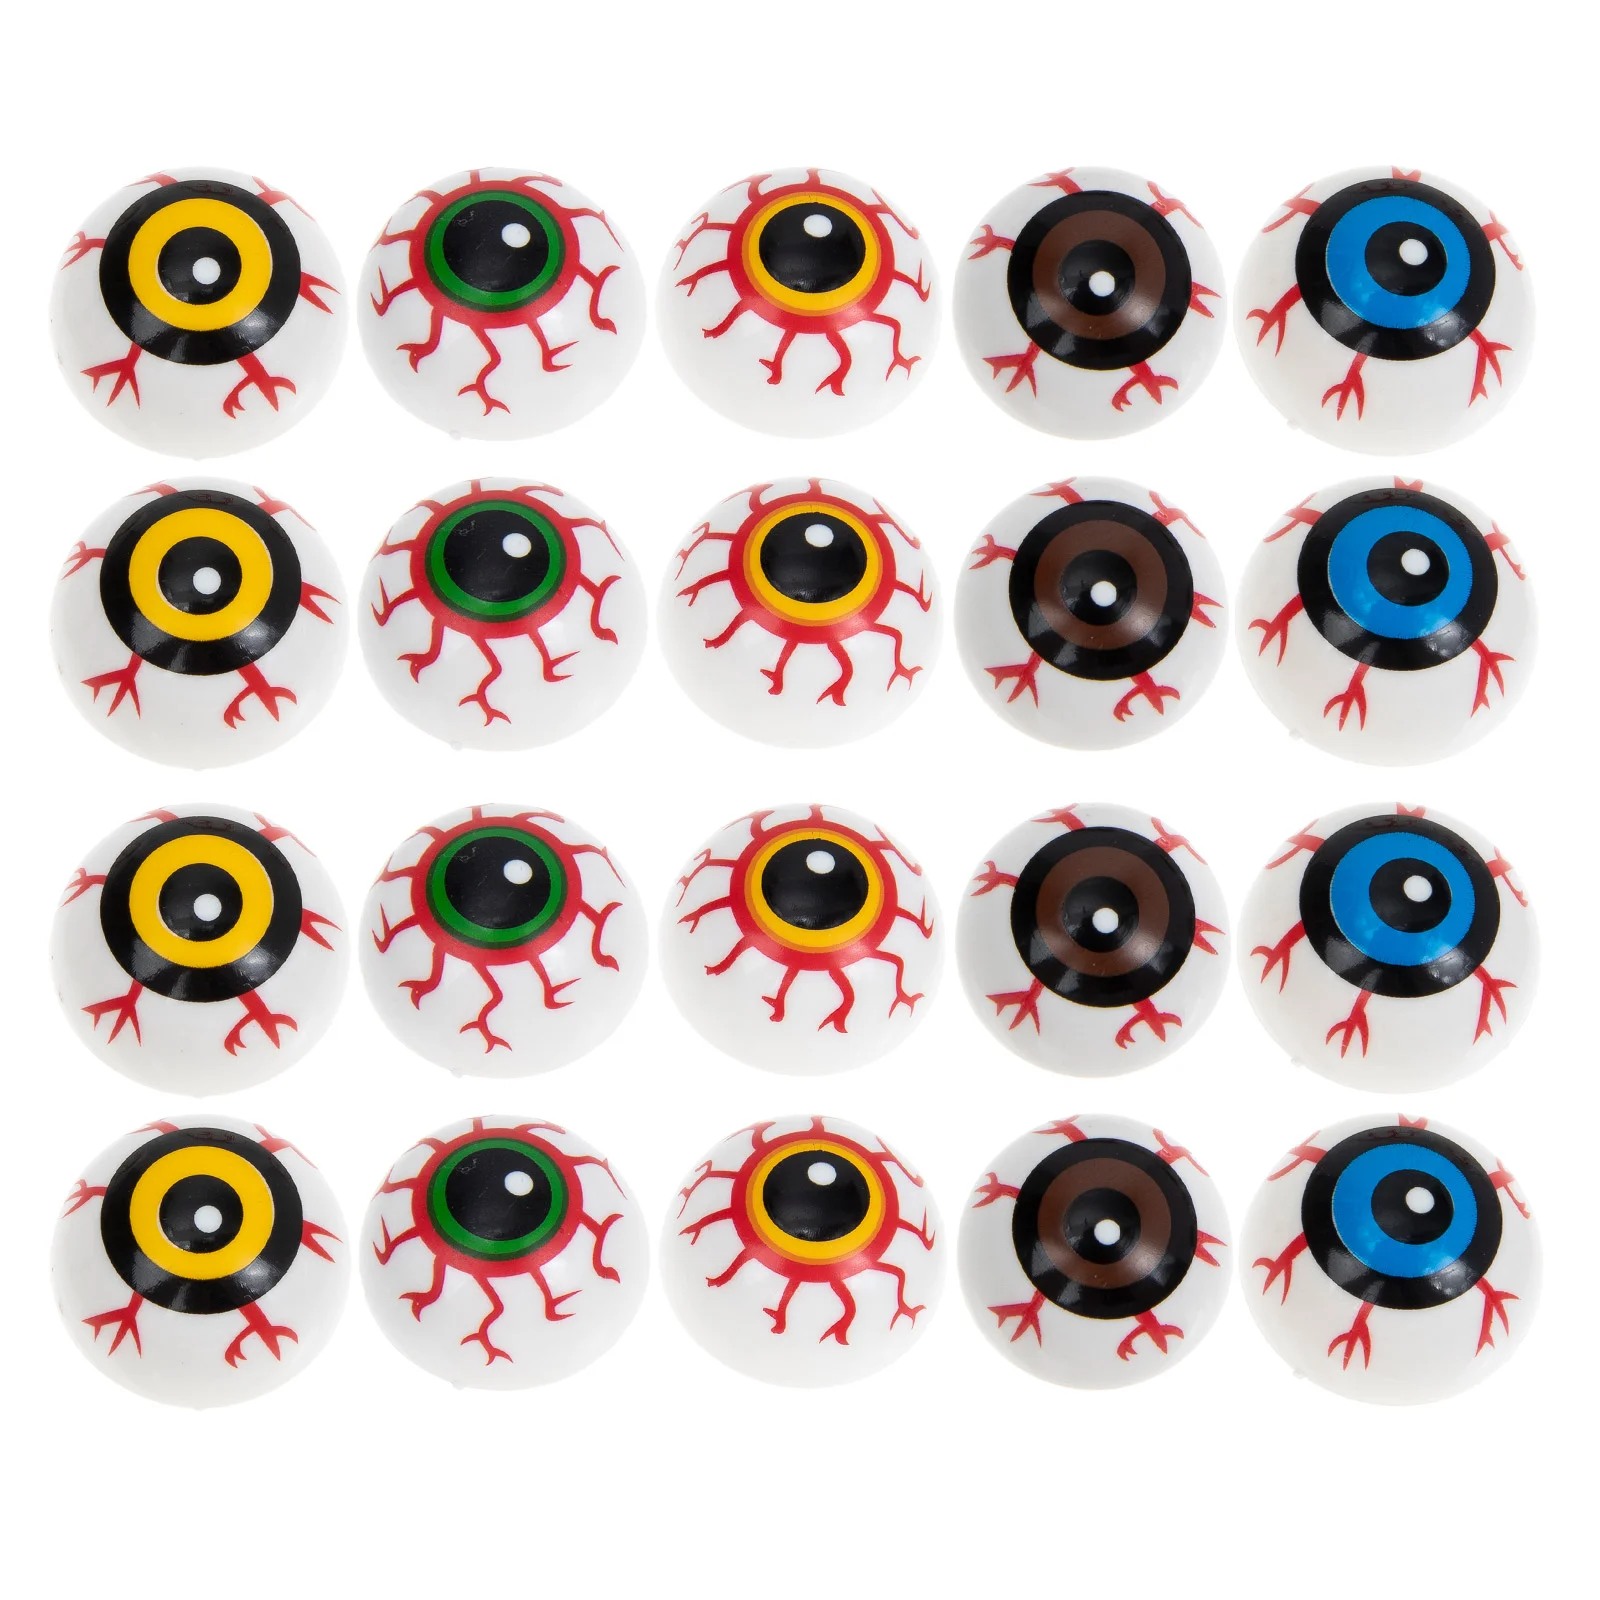 

50 Pcs Halloween Eyeball Buttons Colorful Bounce Toy Eyeballs Decors Model Gift Fake Supplies¡ê Plastic Realistic Inflatables